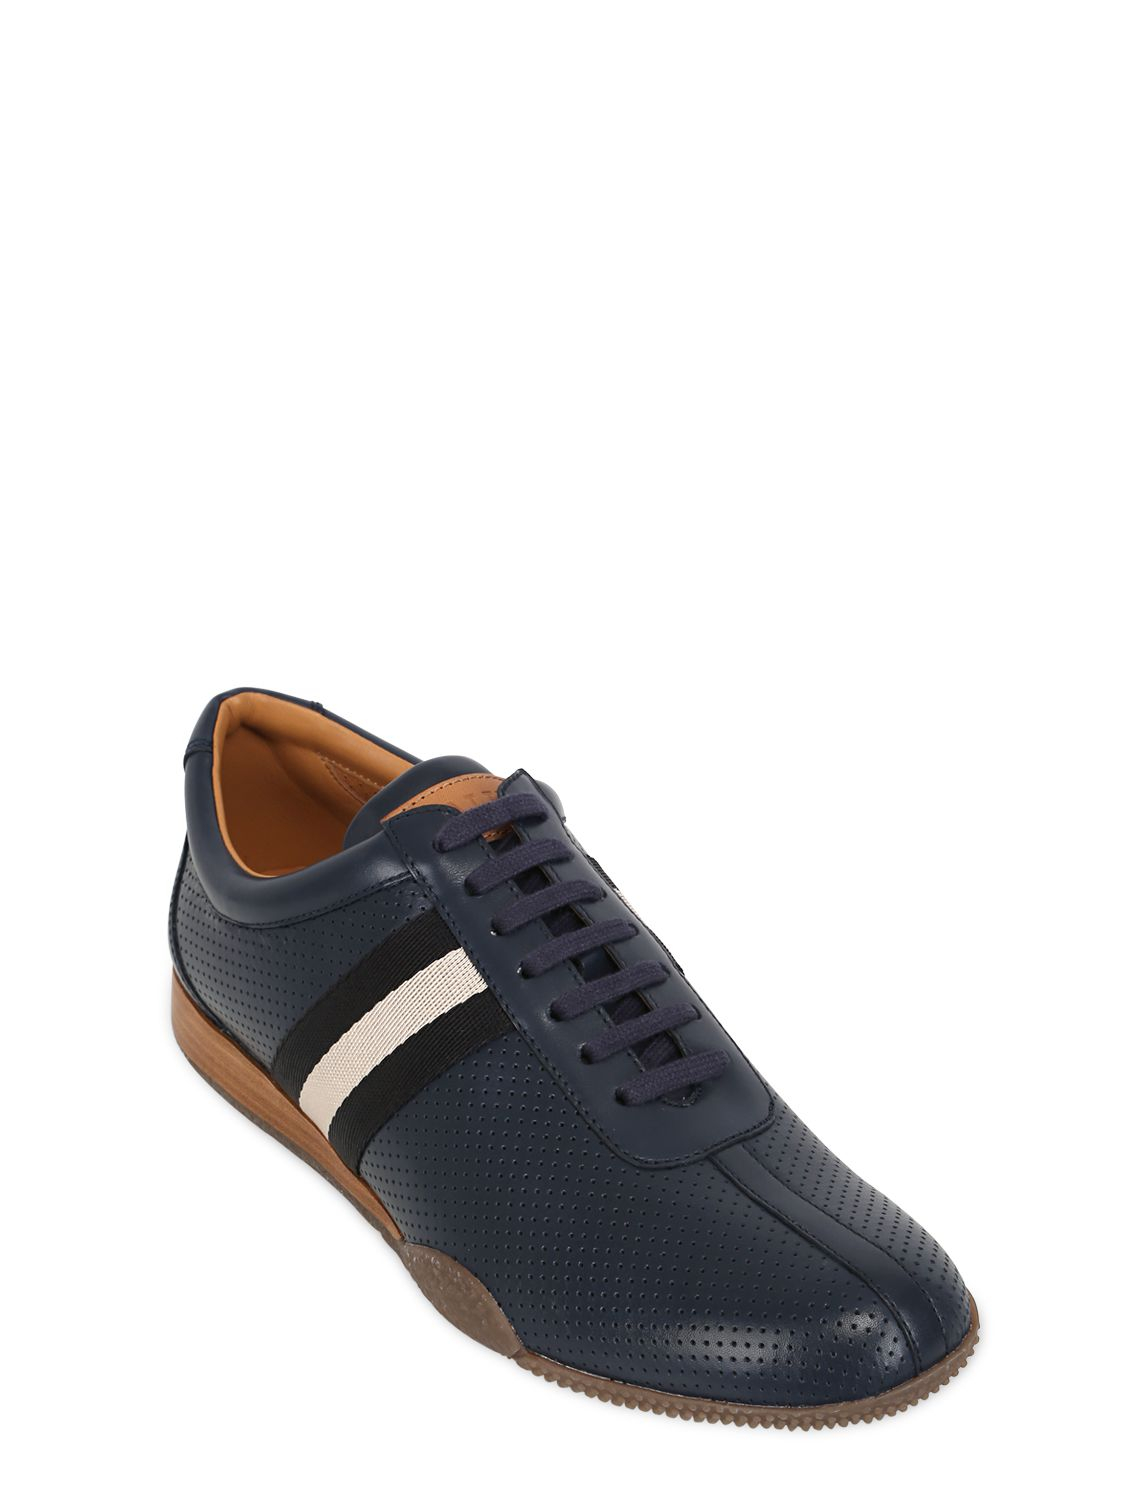 Bally Frenz Perforated Leather Sneakers in Blue for Men | Lyst